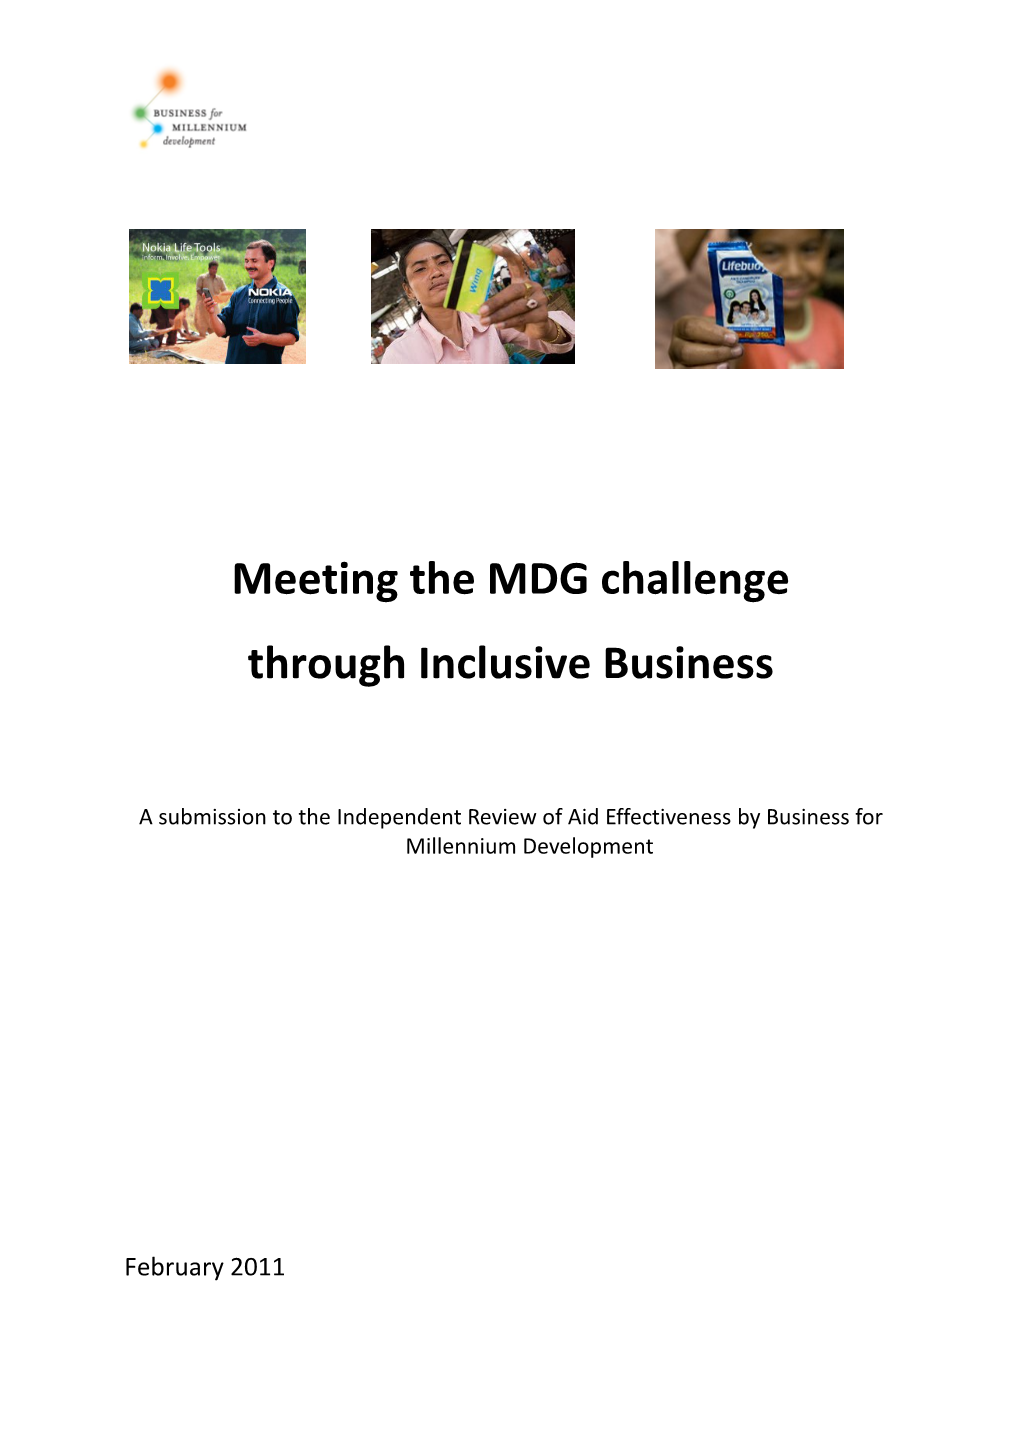 Meeting the MDG Challenge